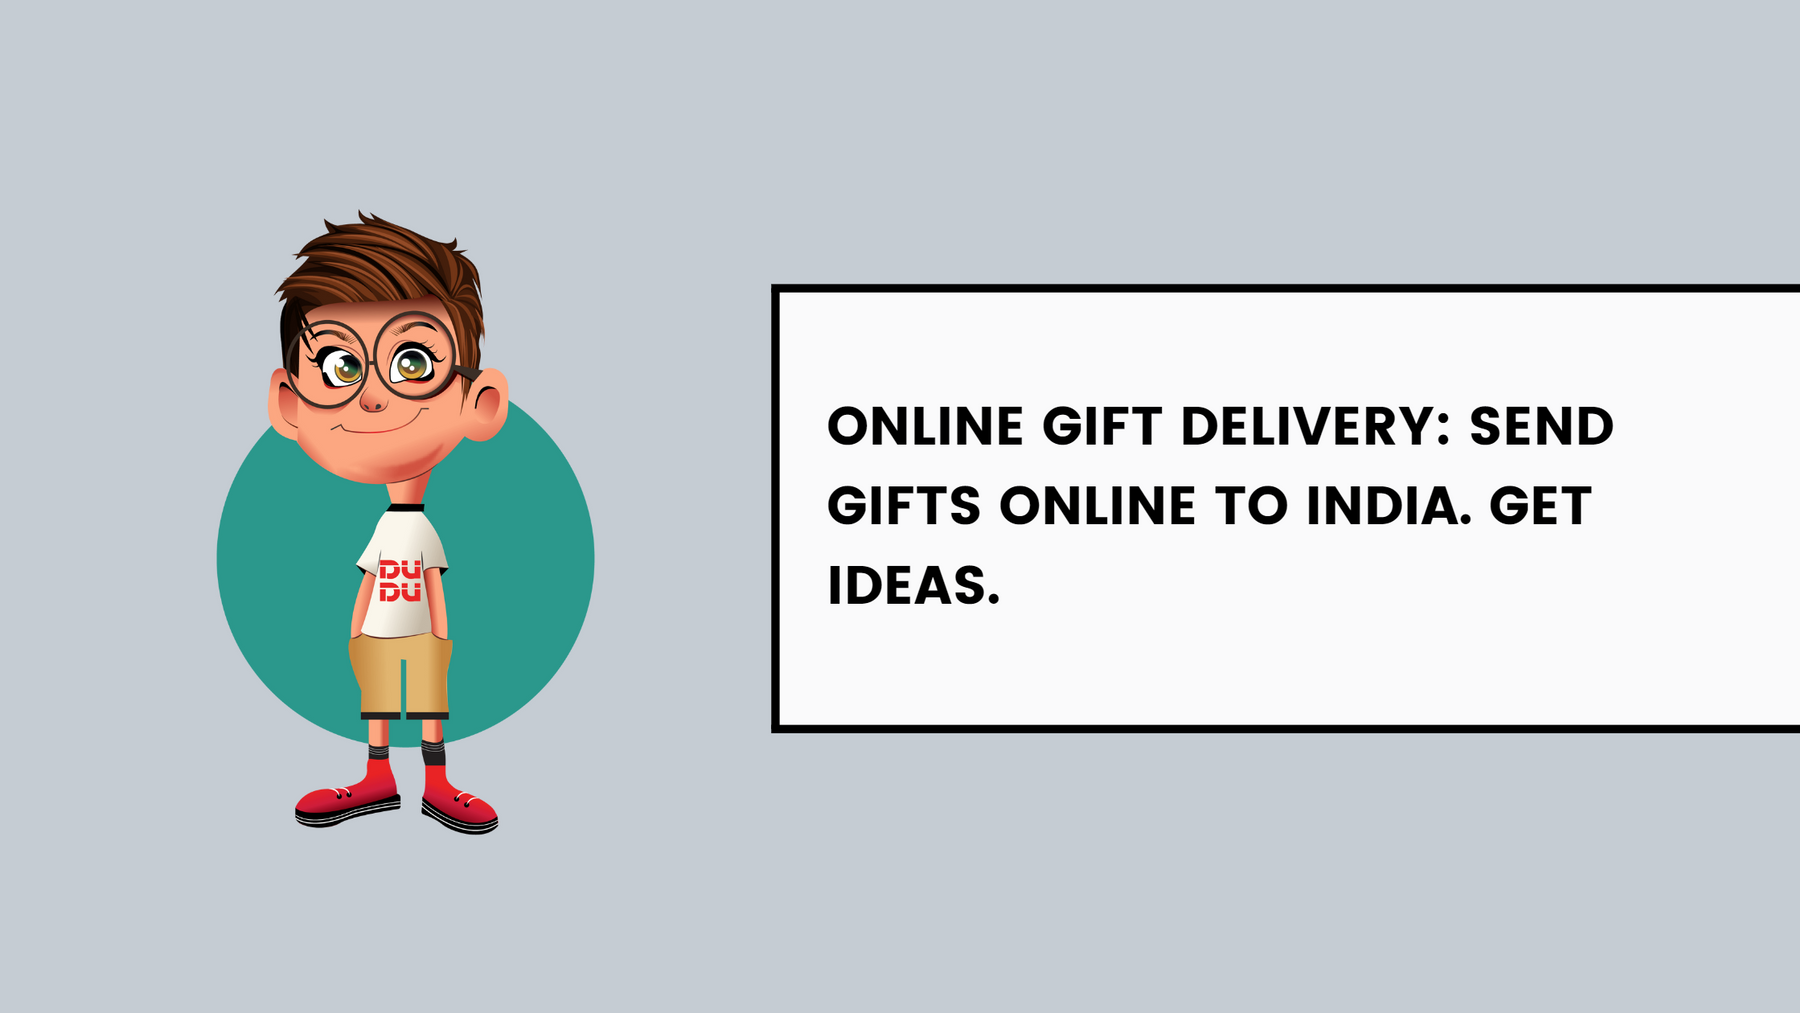 Online Gift Delivery: Send gifts online to India. Get ideas.